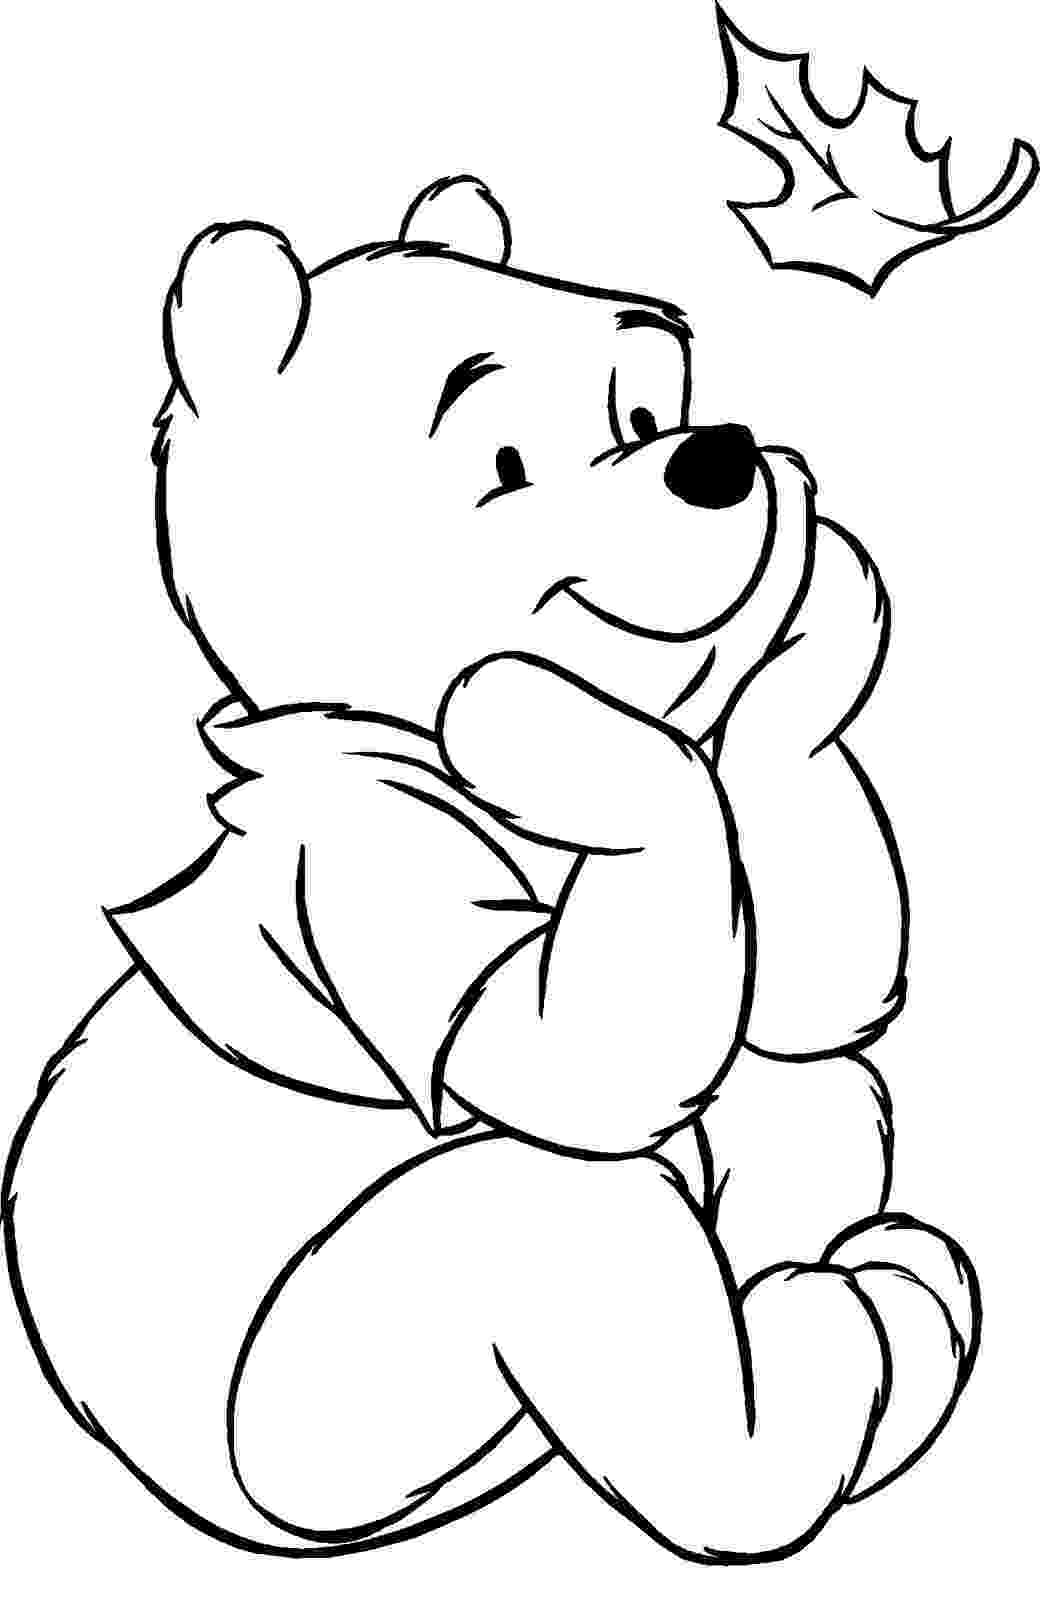 free winnie the pooh coloring sheets transmissionpress winnie the pooh coloring pages free the sheets winnie coloring pooh free 